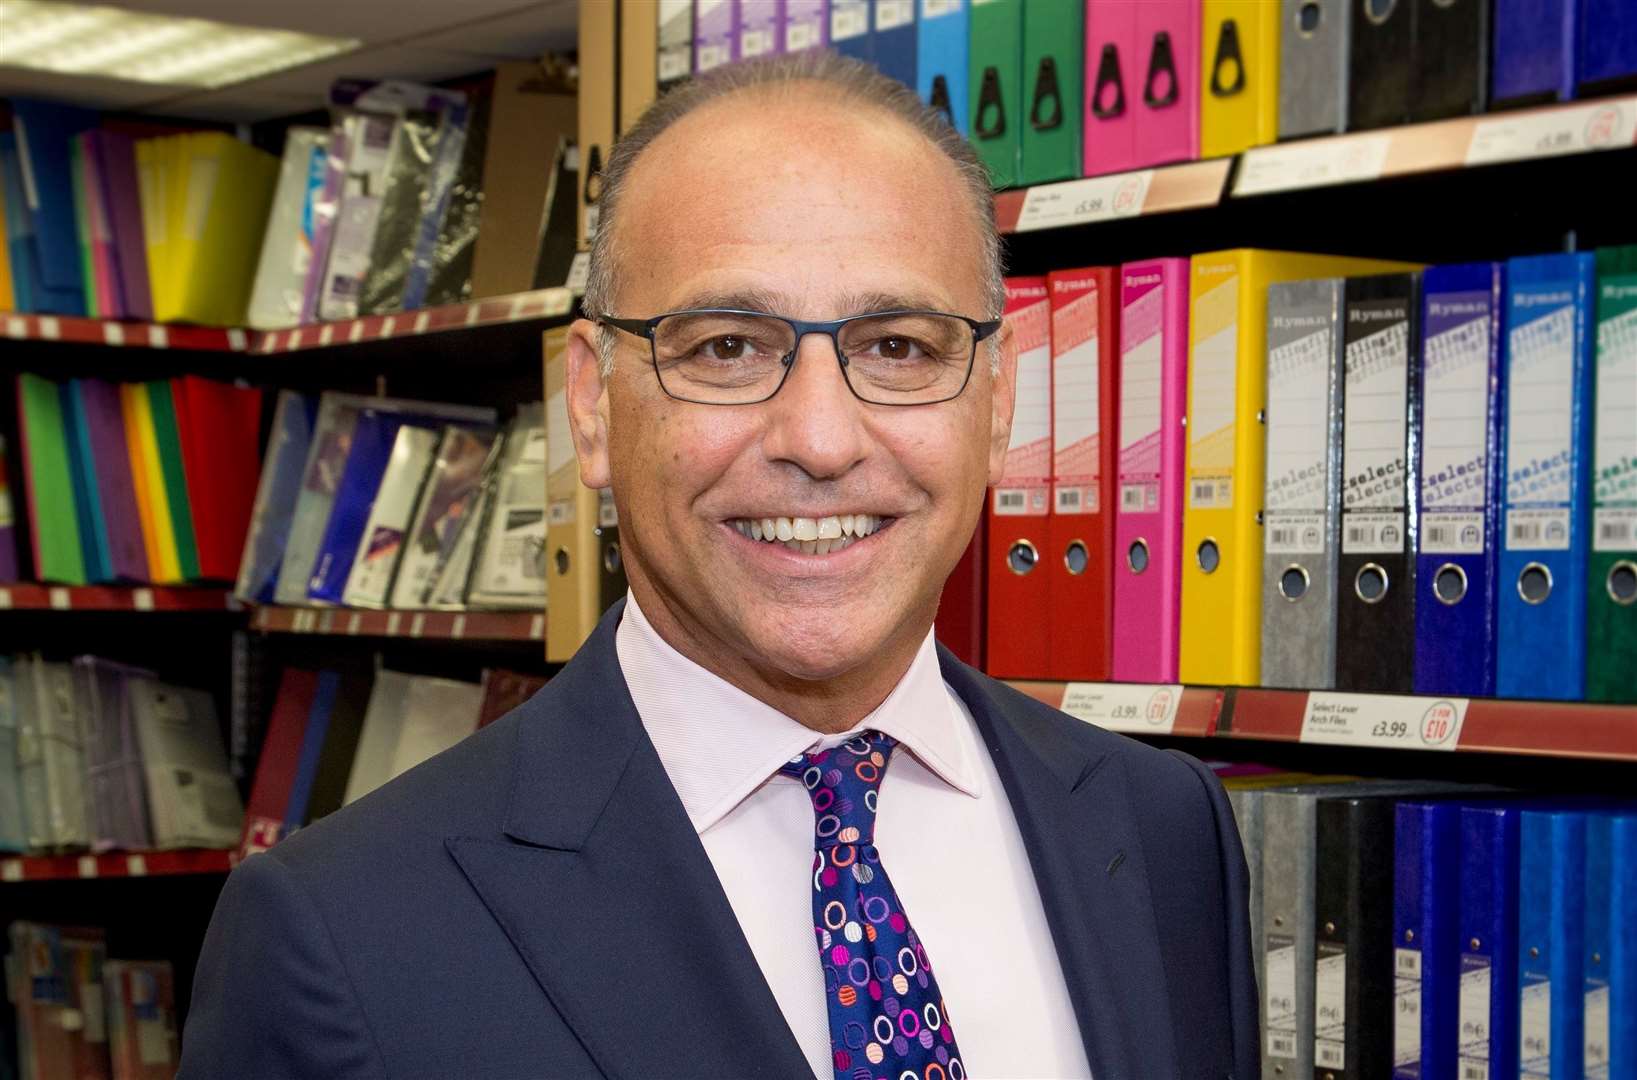 Theo Paphitis has proved one of retail's success stories over recent decades